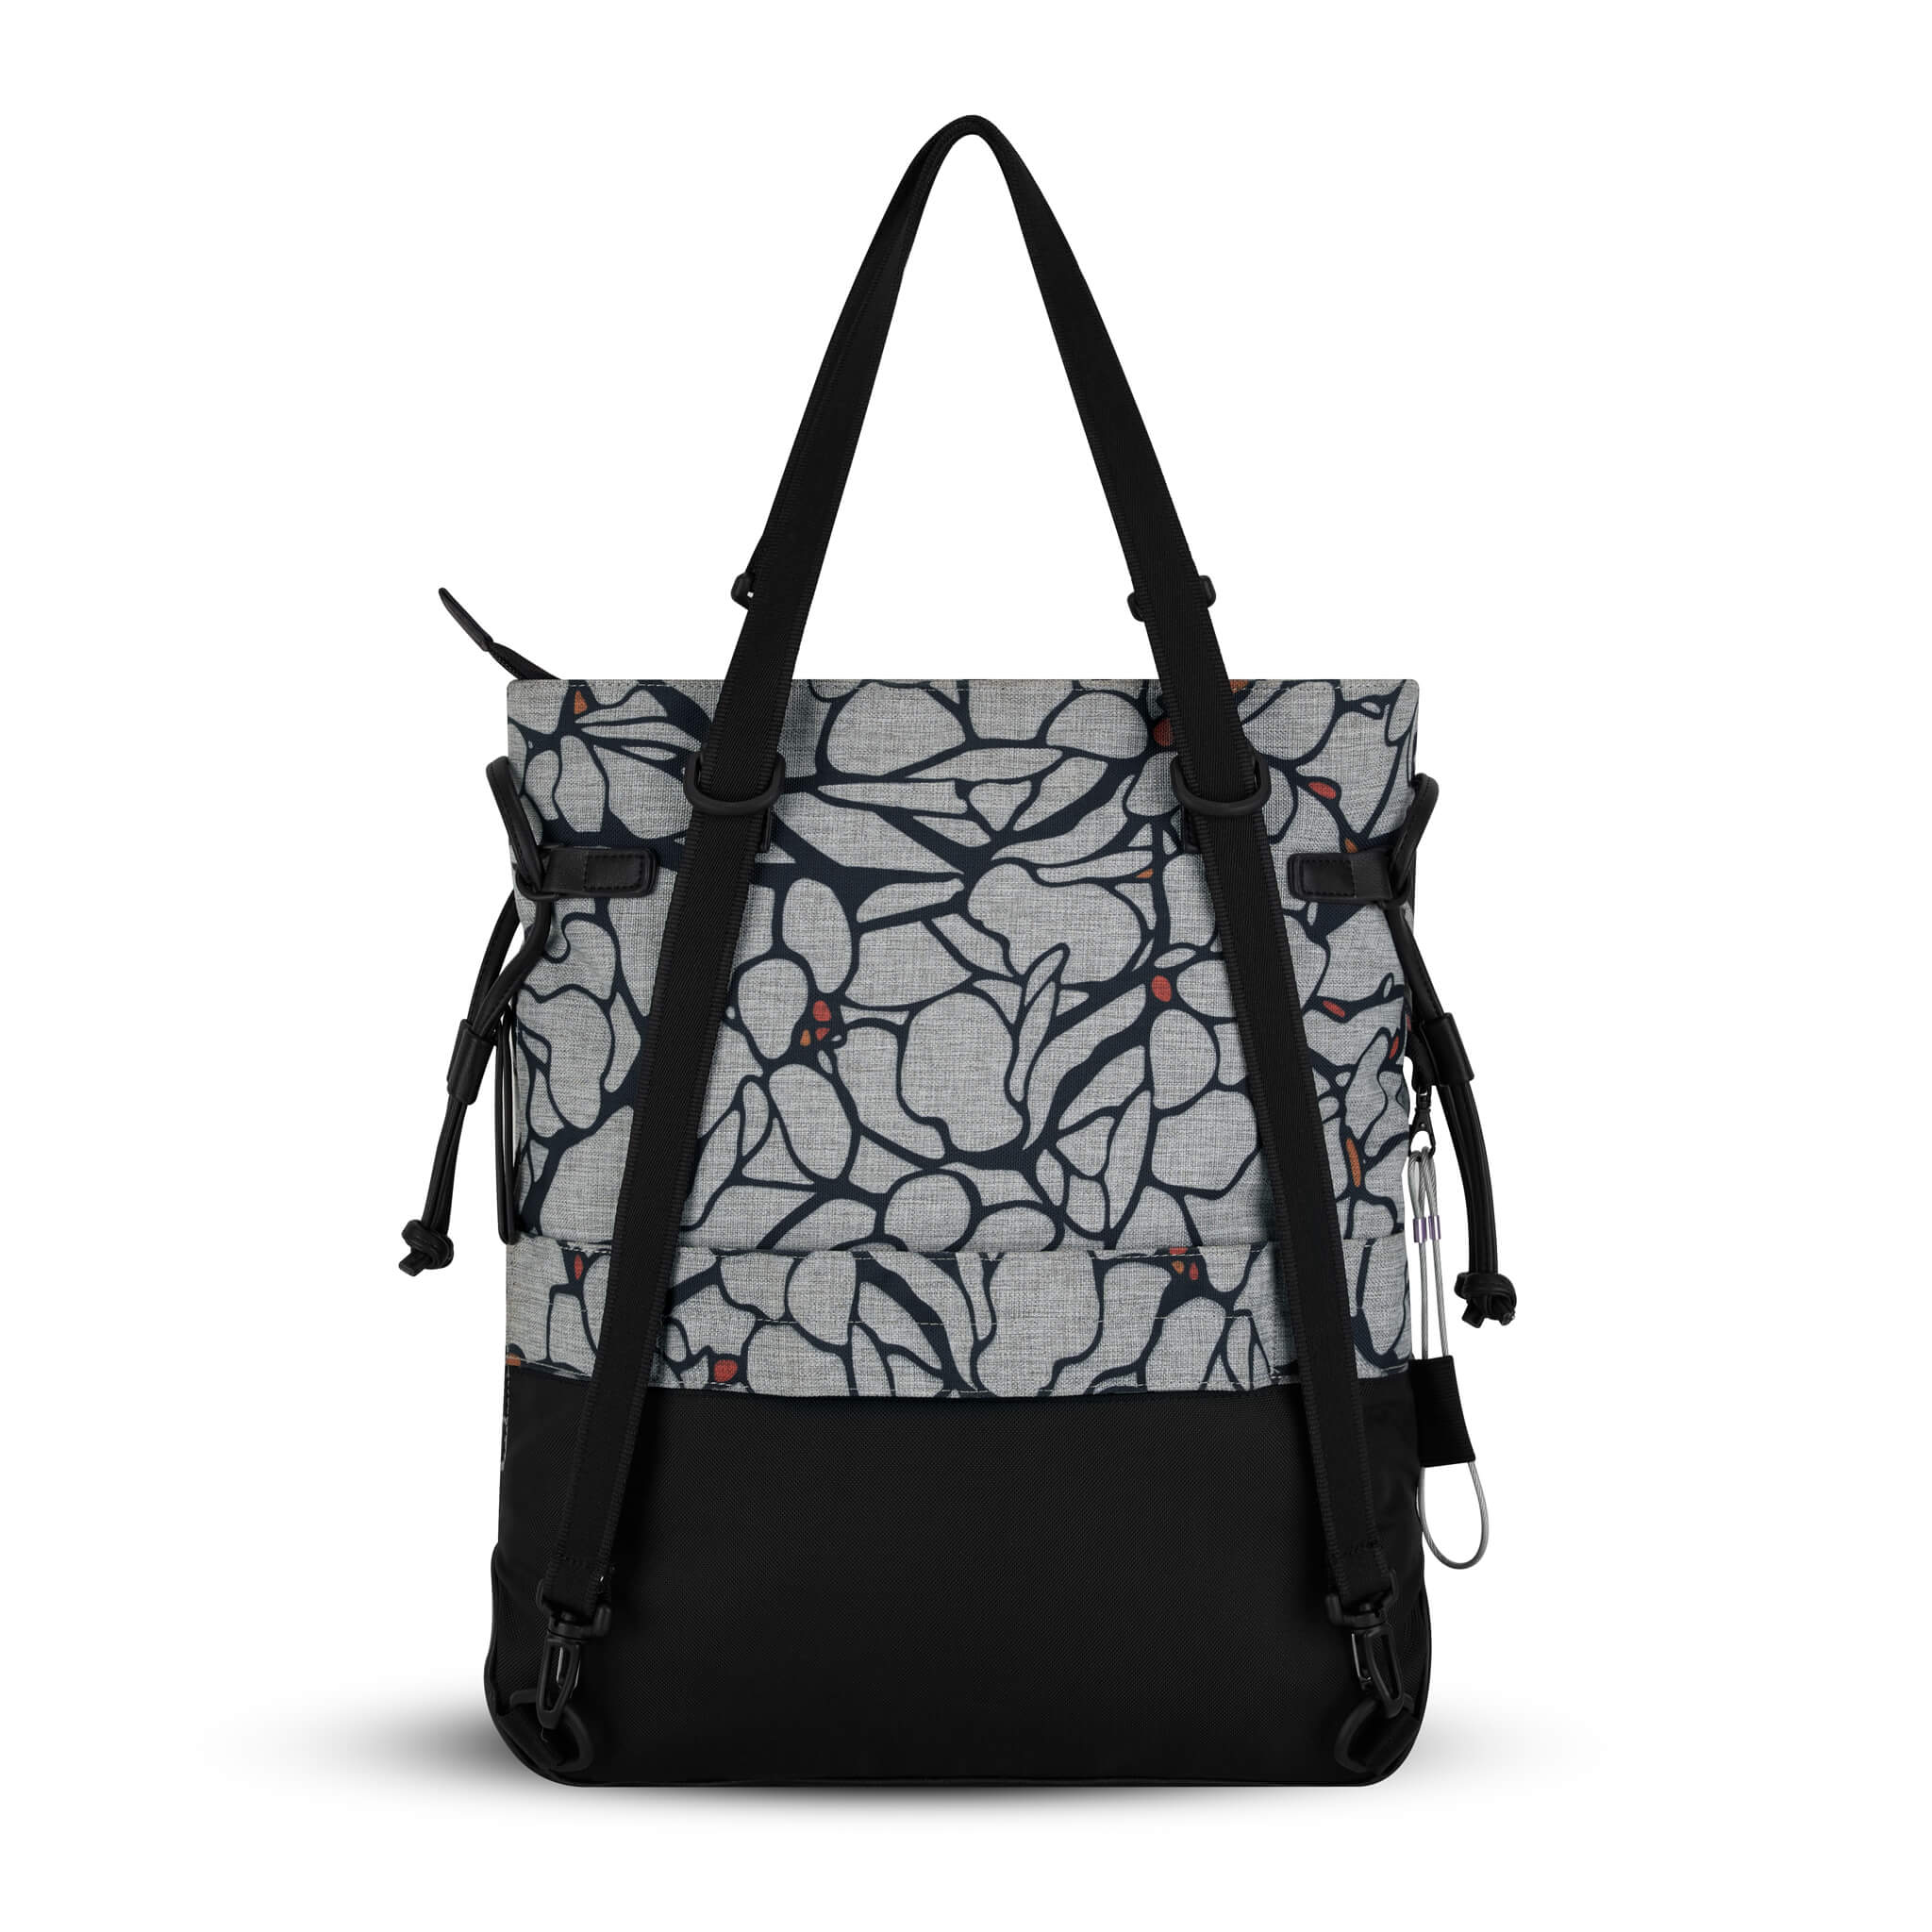 Back view of the Sherpani Anti-Theft tote backpack, the Tempest in Sakura. The convertible bag includes RFID protection, locking zipper pockets, adjustable straps, and a trolley sleeve. 